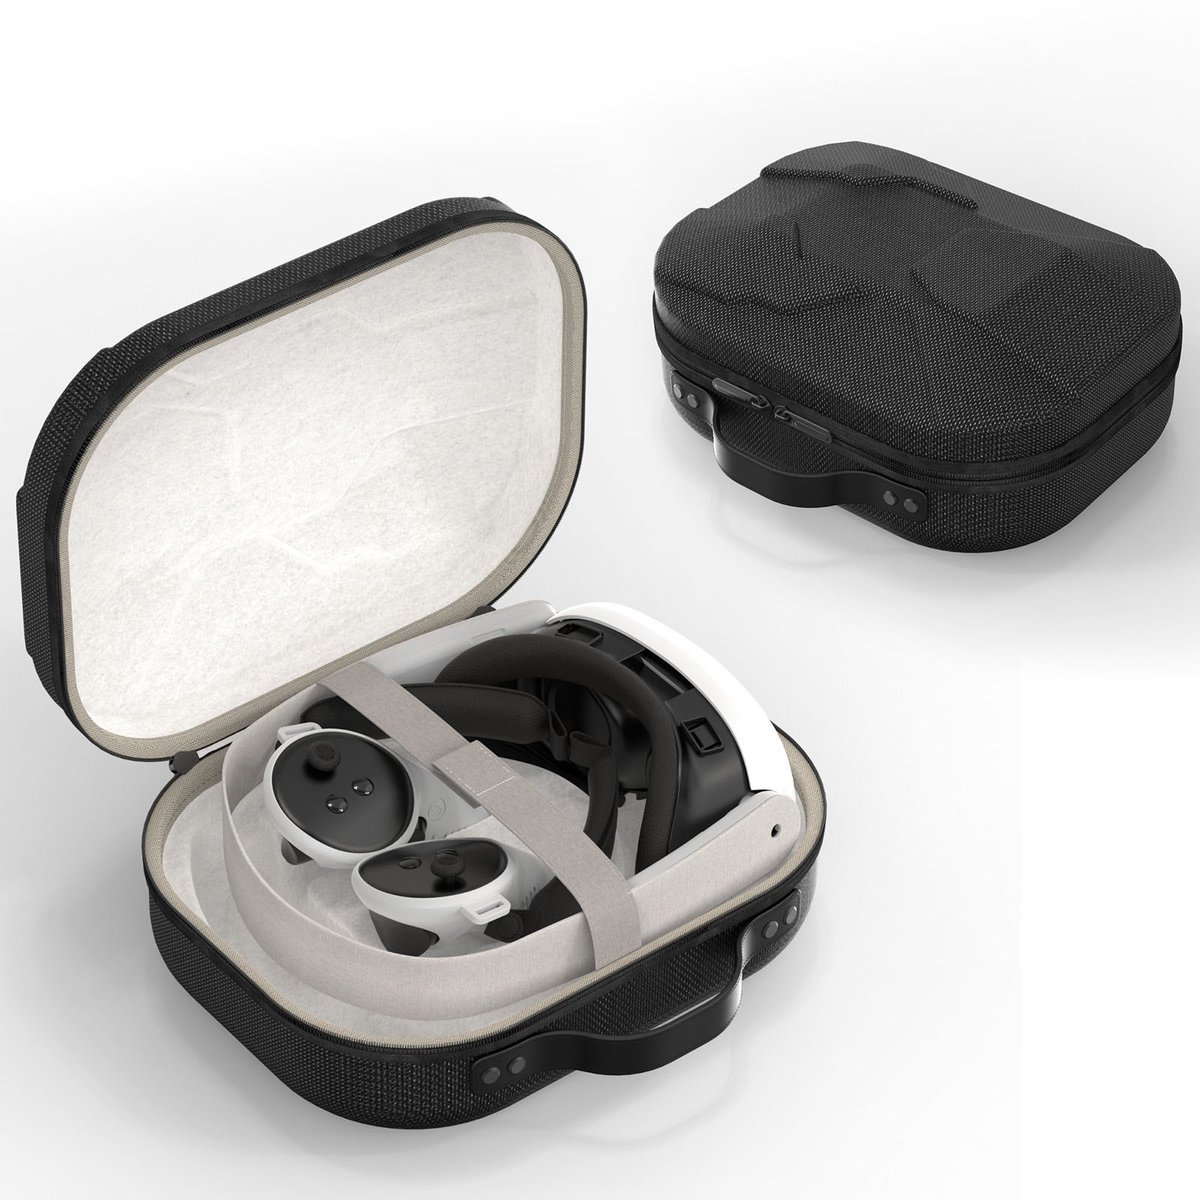 🥽🧰A home for quest 3 console and accessories.
 #Quest3 #mbananavr #vraccessories #VR #VRGaming #carrycase